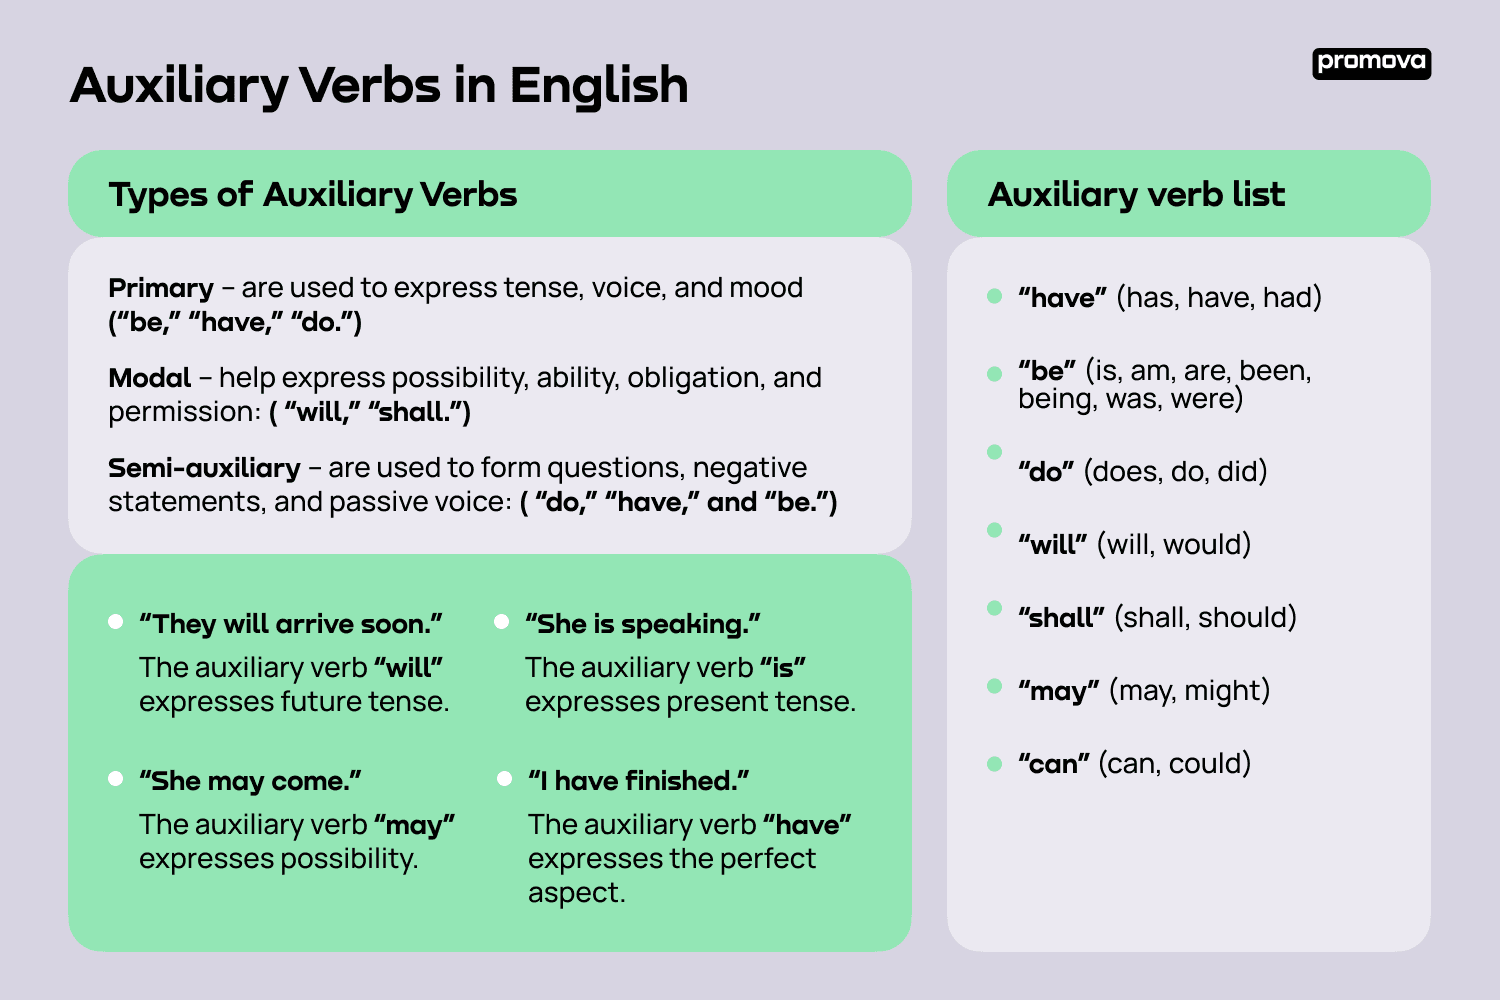 Auxiliary Verbs in English